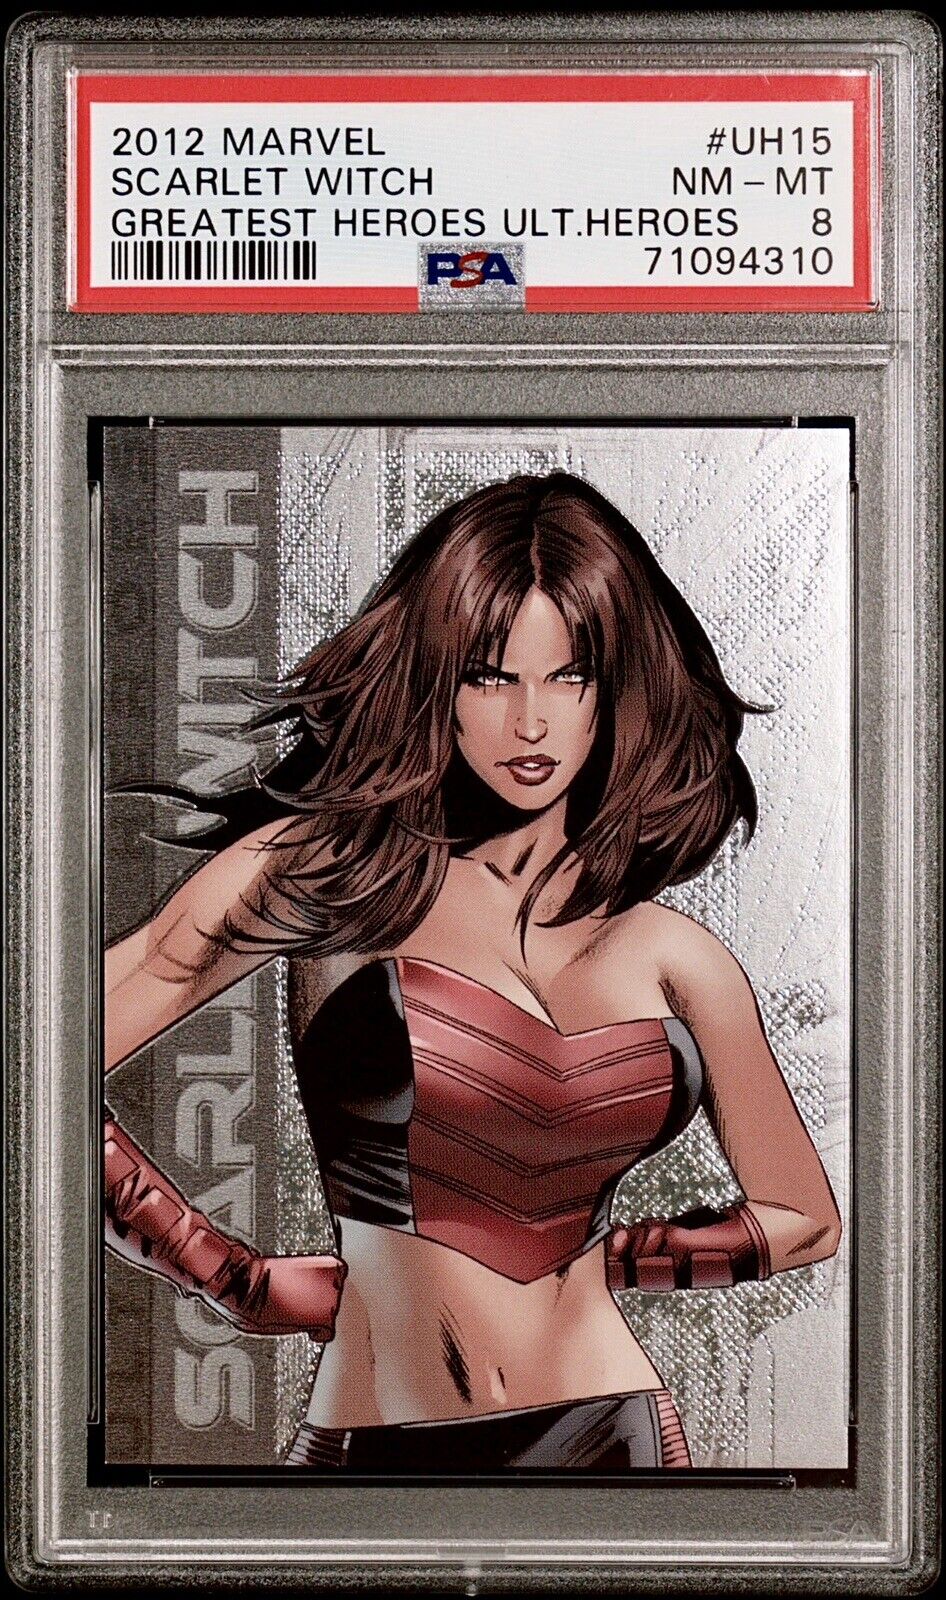 2012 Marvel Greatest Heroes Ultimate #UH15 Scarlet Witch PSA 8 🔥RARE🔥🍀